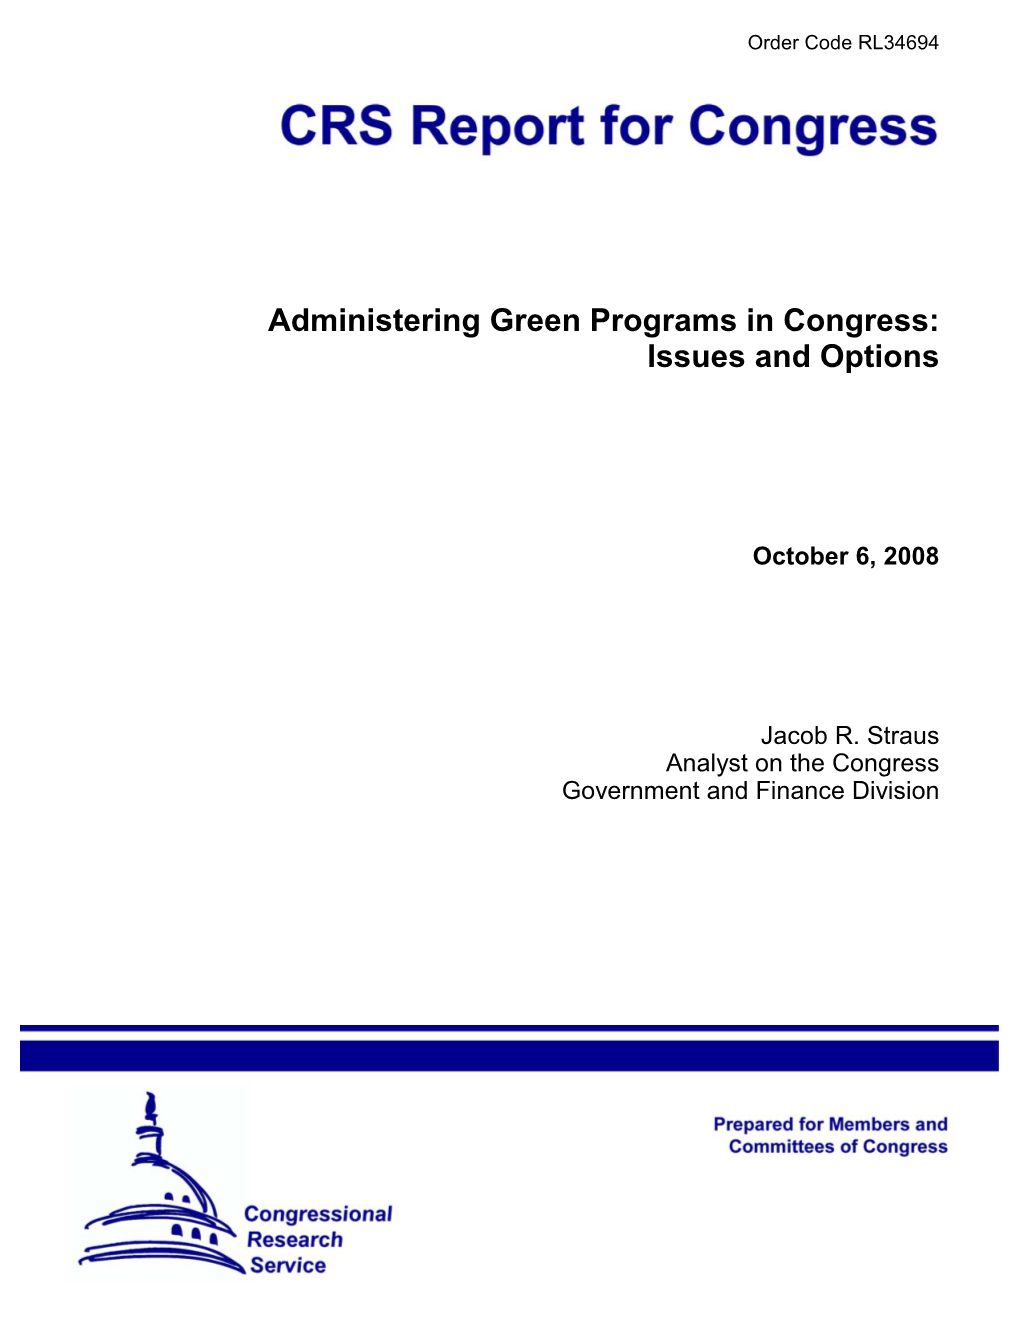 Administering Green Programs in Congress: Issues and Options